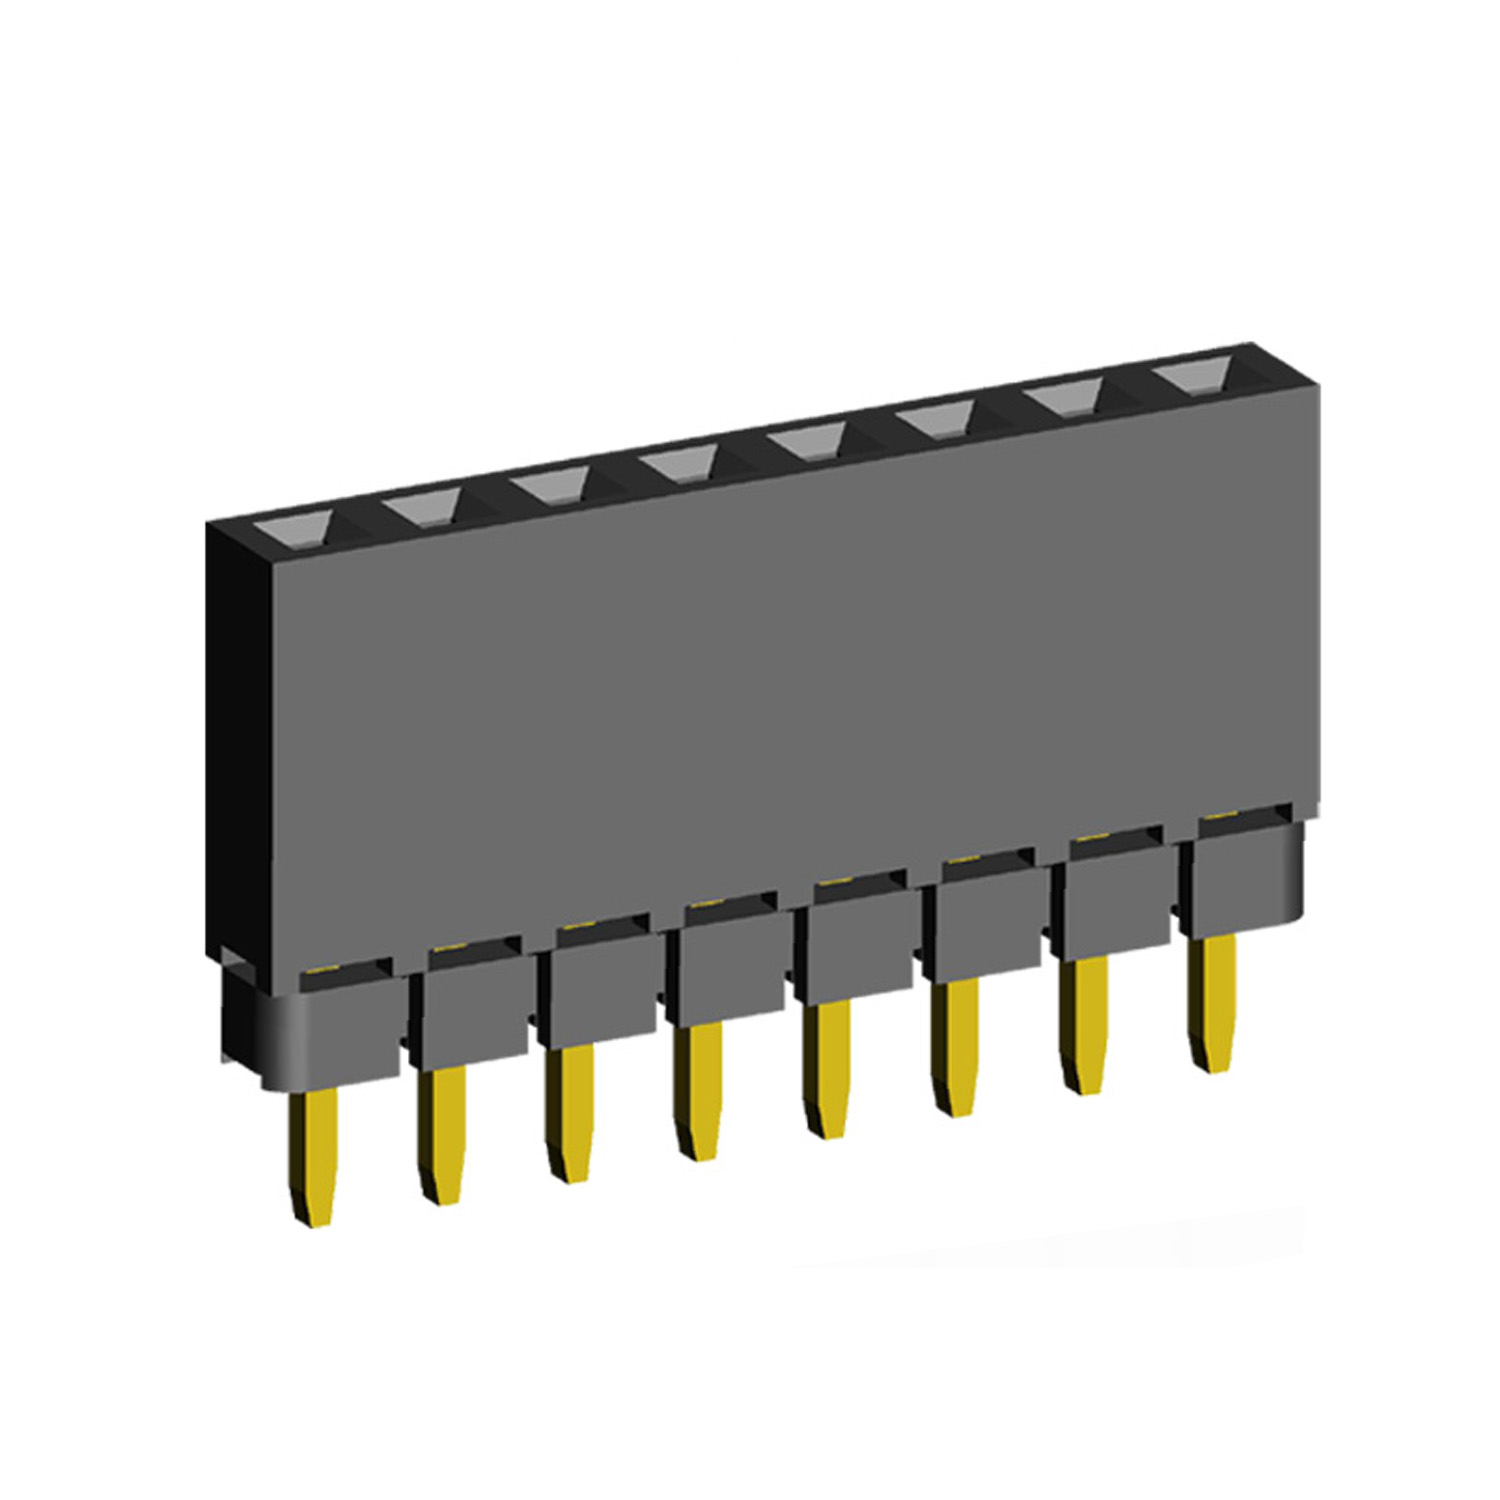 2209SDI-XXG-1A series, straight single-row sockets with increased insulator on the Board for mounting in holes, pitch 2,0 mm, 1x40 pins